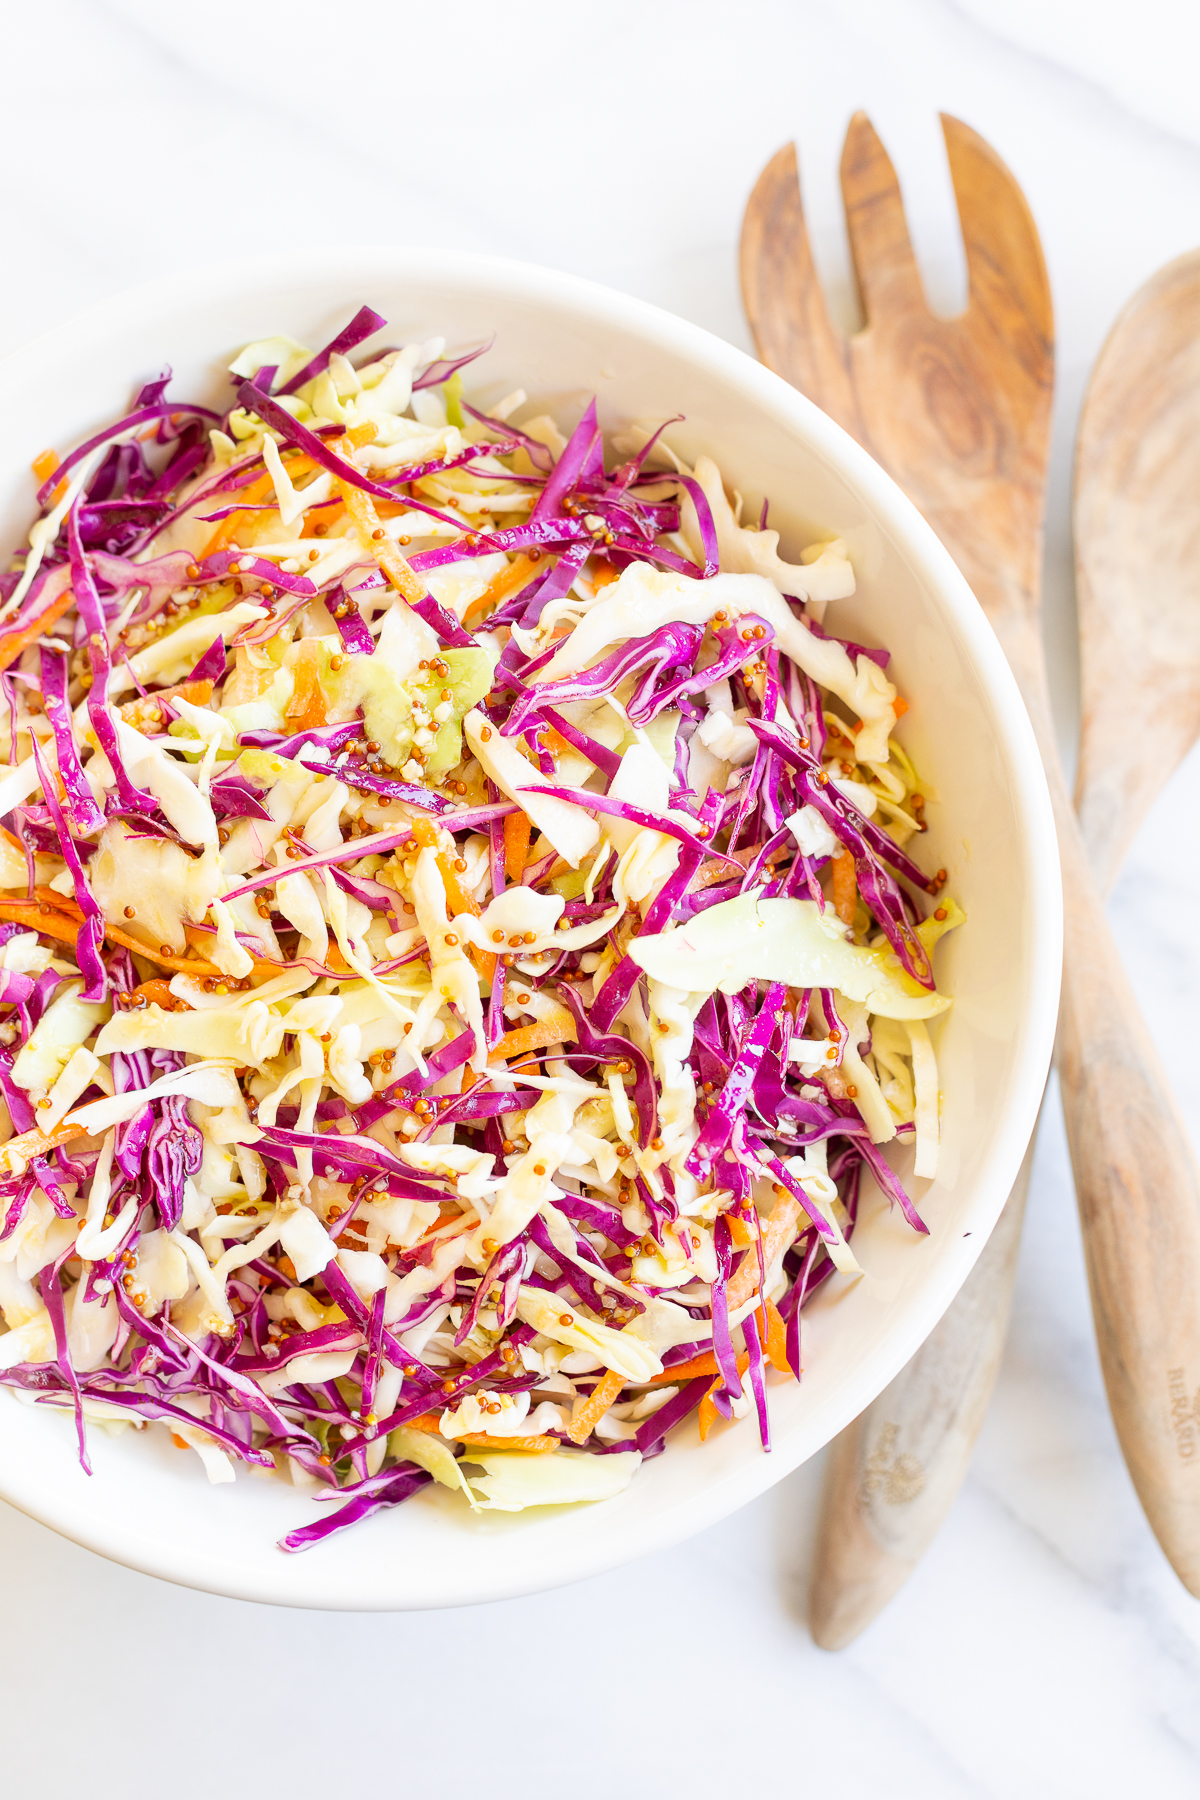 White salad bowl filled with colorful cabbage salad and wooden serving spoons.